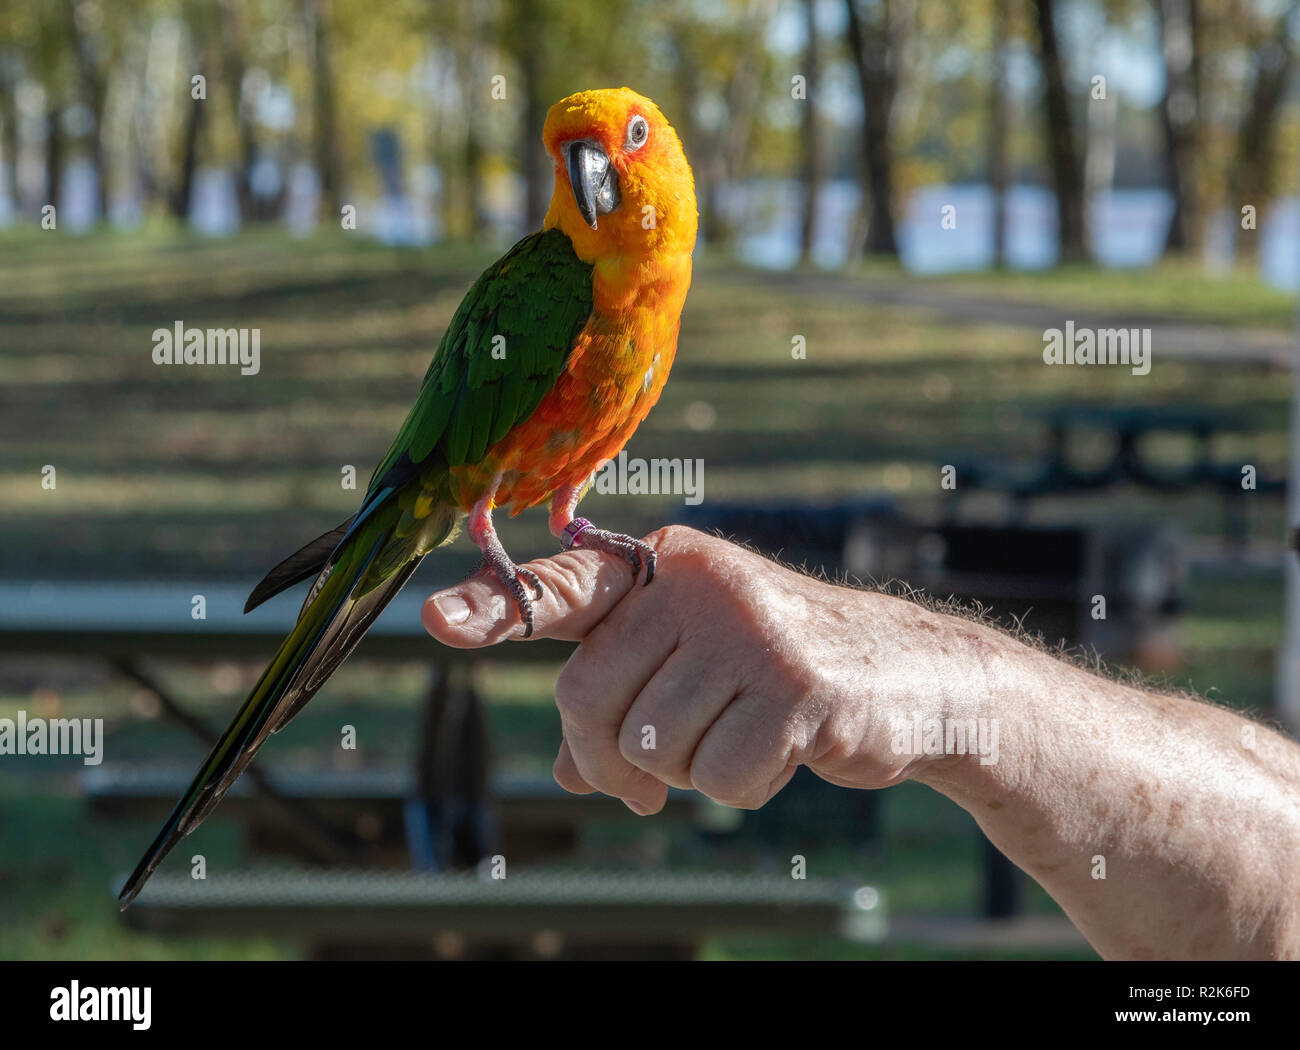 A Jenday Conure, Aratinga jandaya, a type of small parrot, perches on her owner's hand in the evening light. Stock Photo